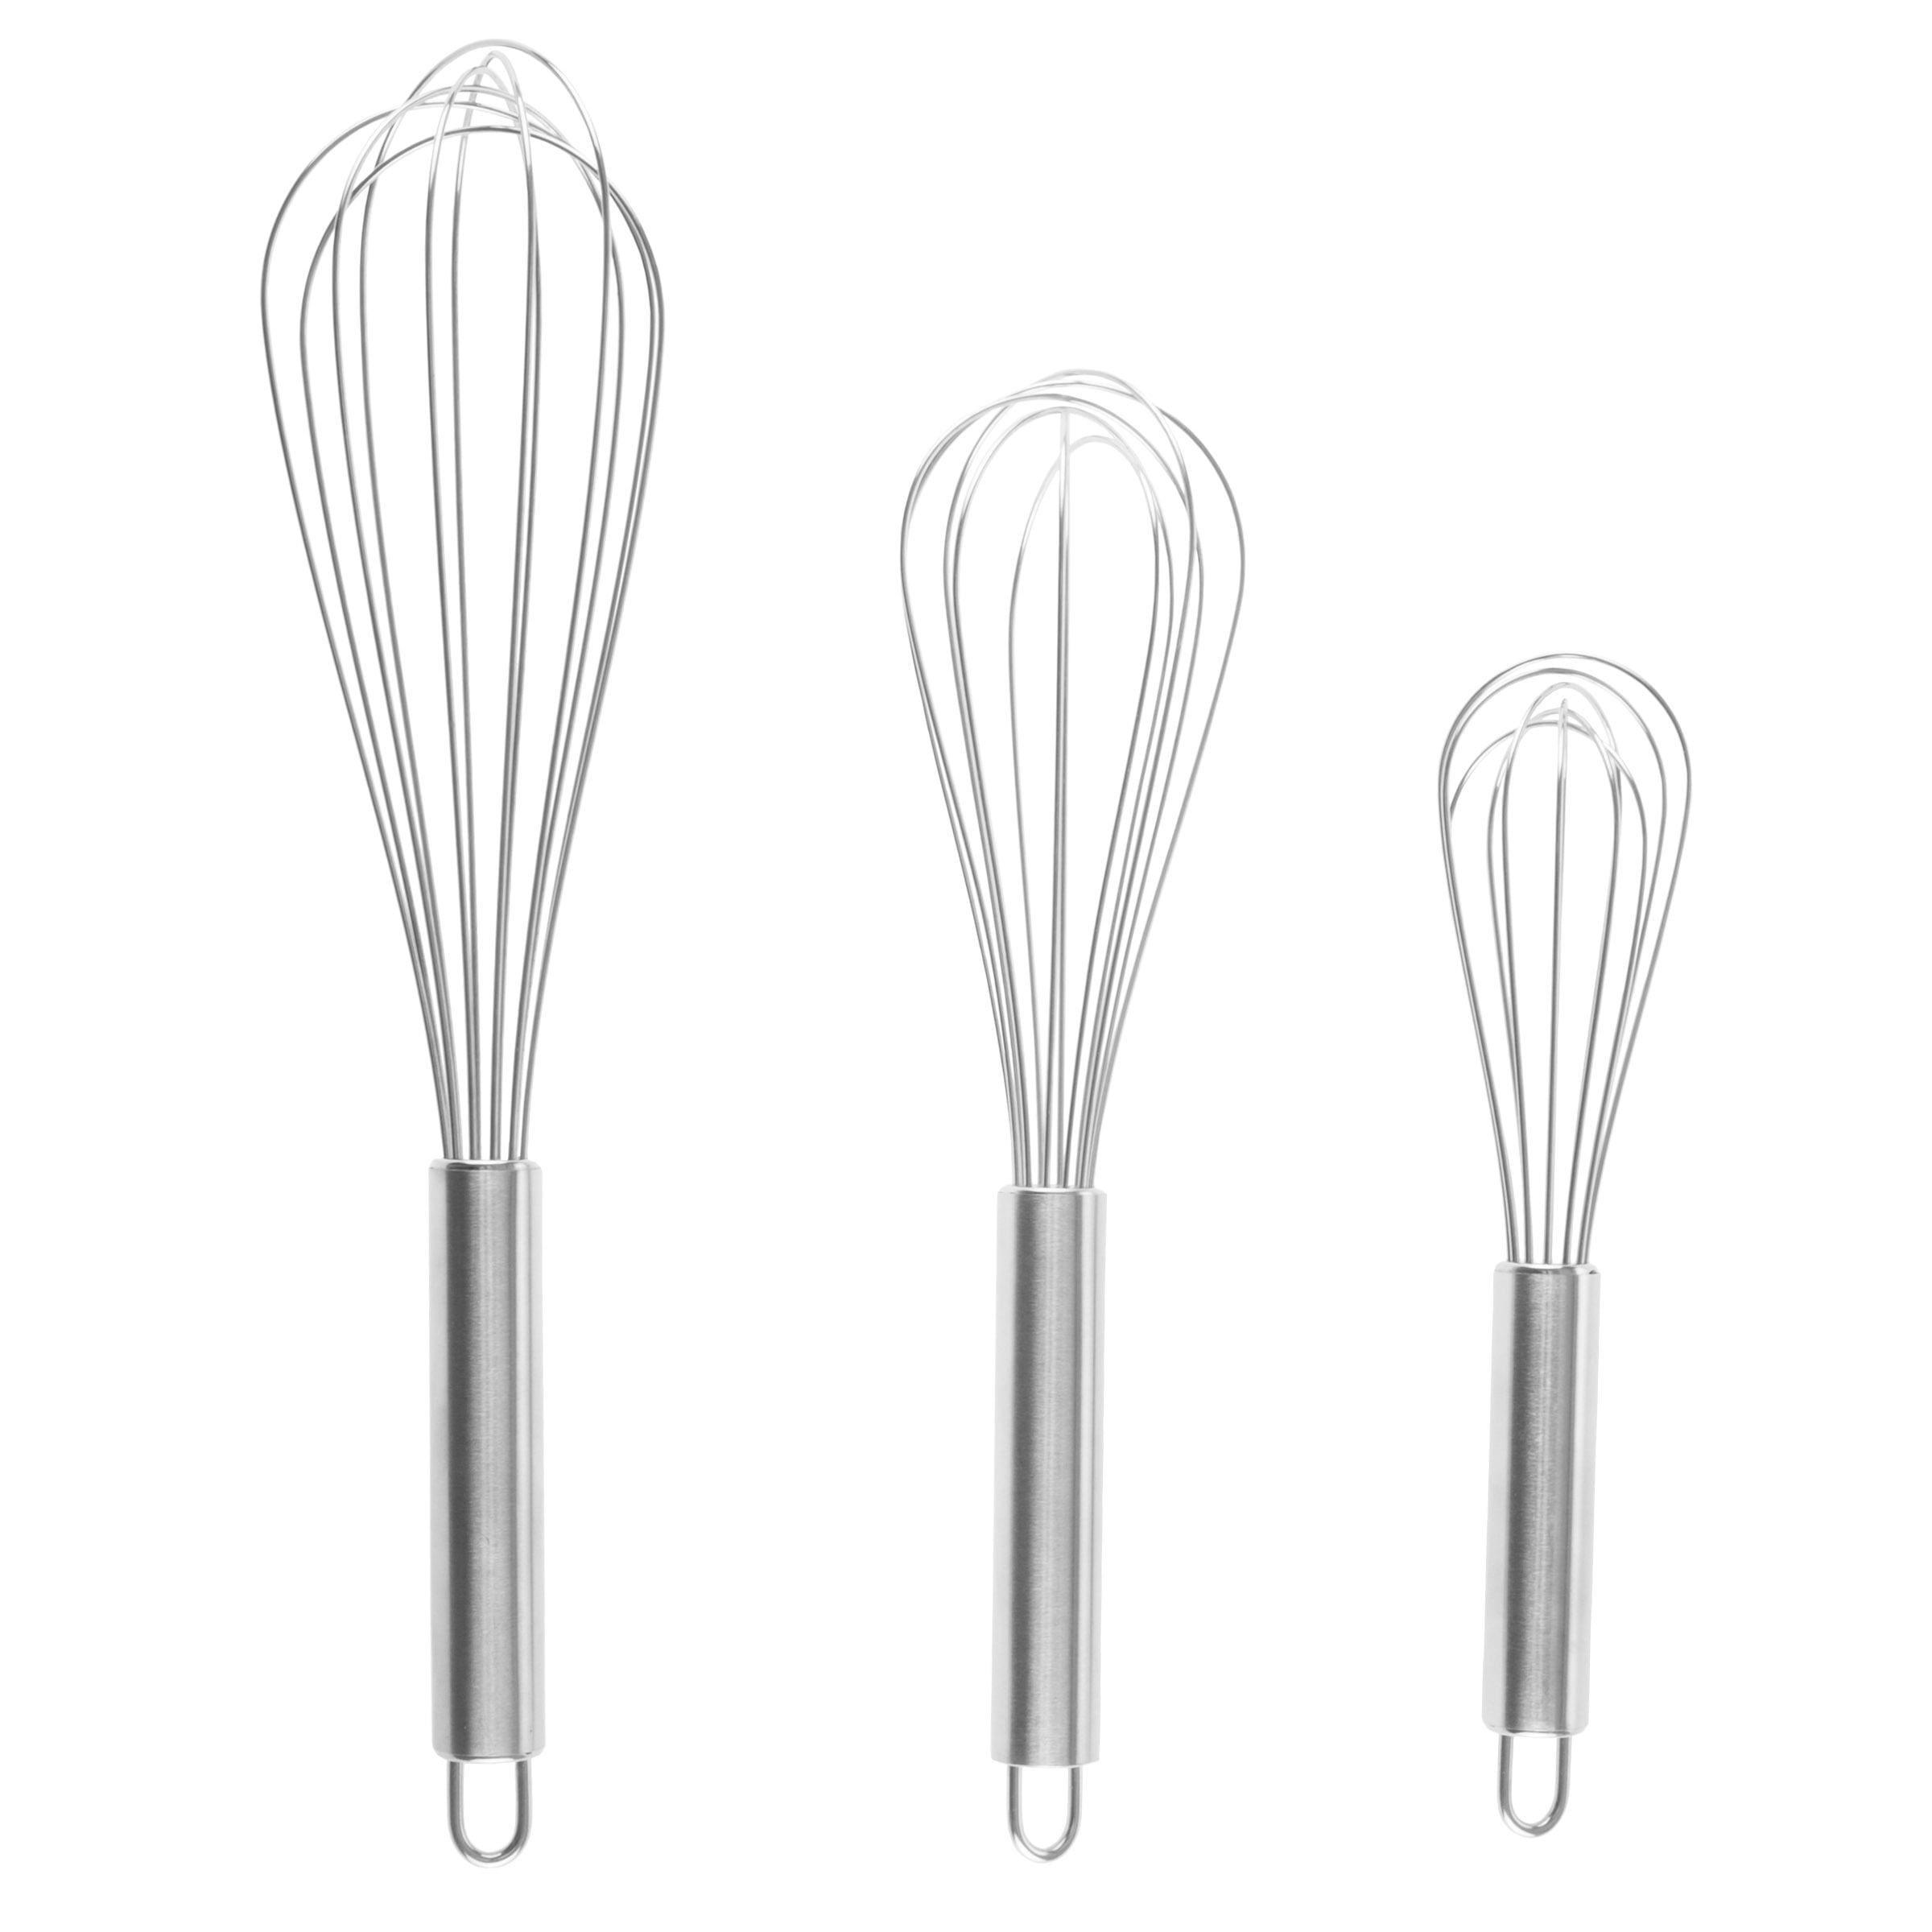 Stainless Steel Whisk (Set of 3) on Food52